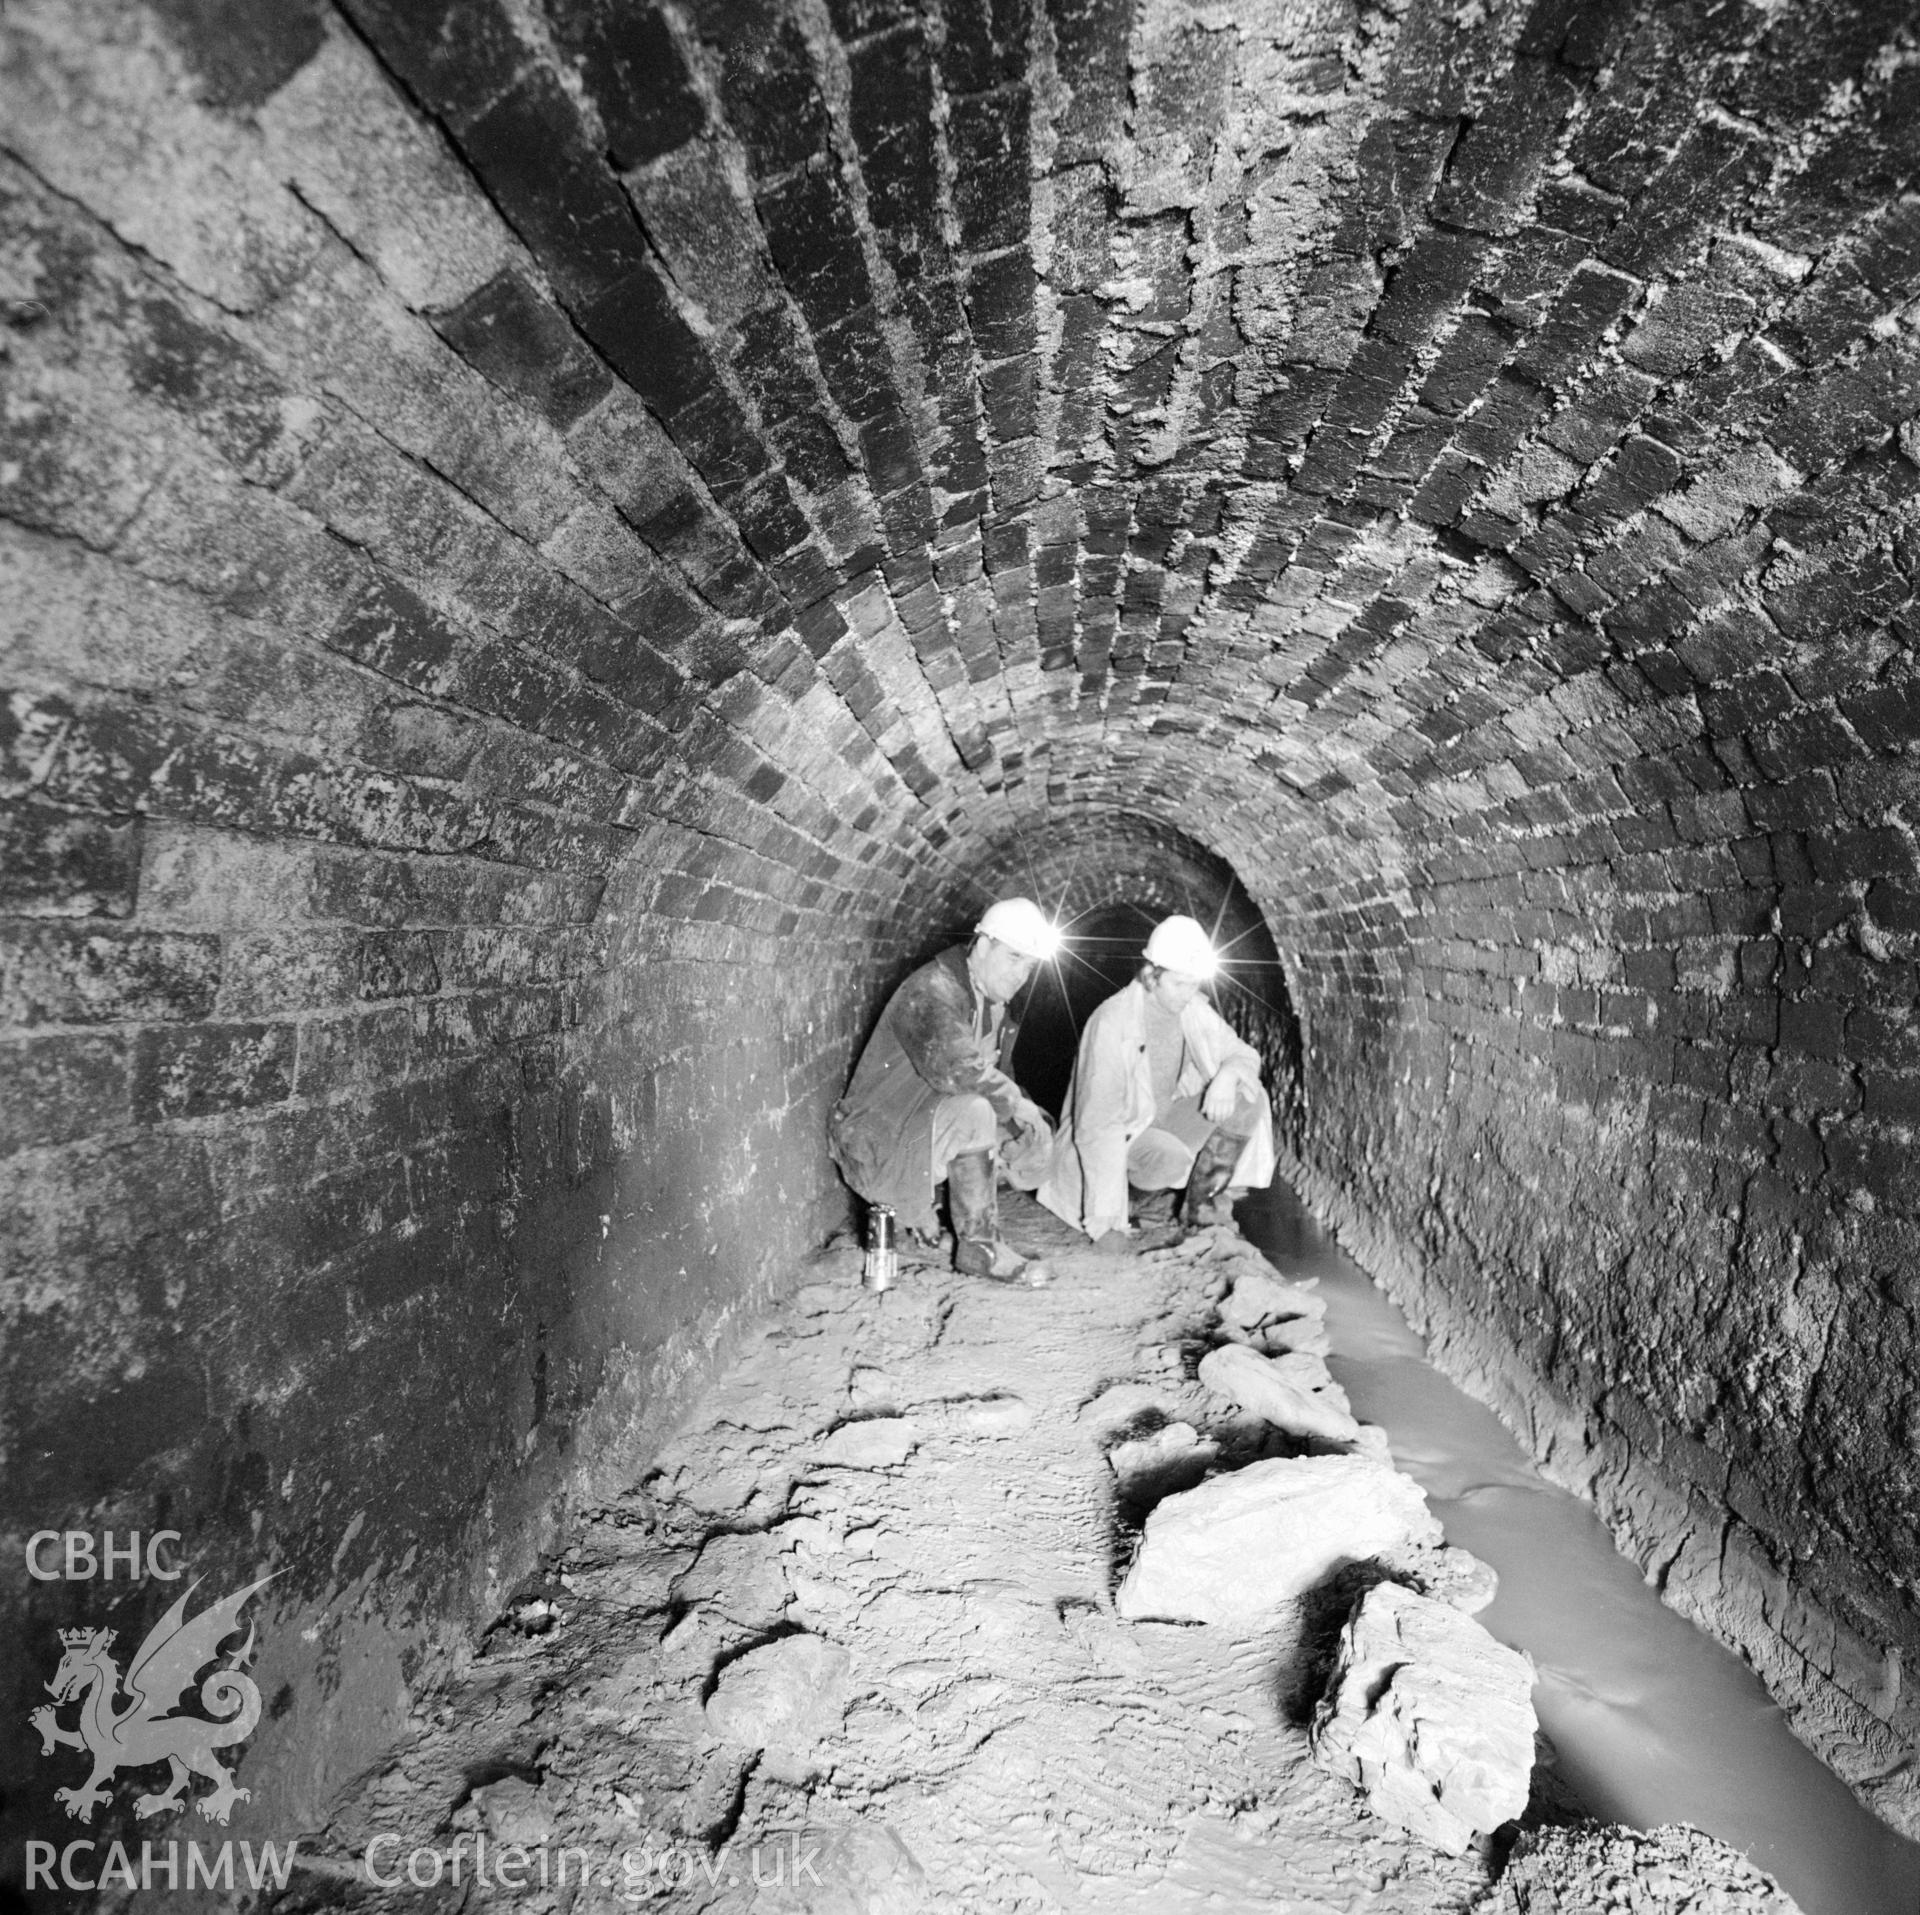 Workmen in old 19th Century workings in Coity Pits (Cornwell ref:2100). NA/MM/91/121e